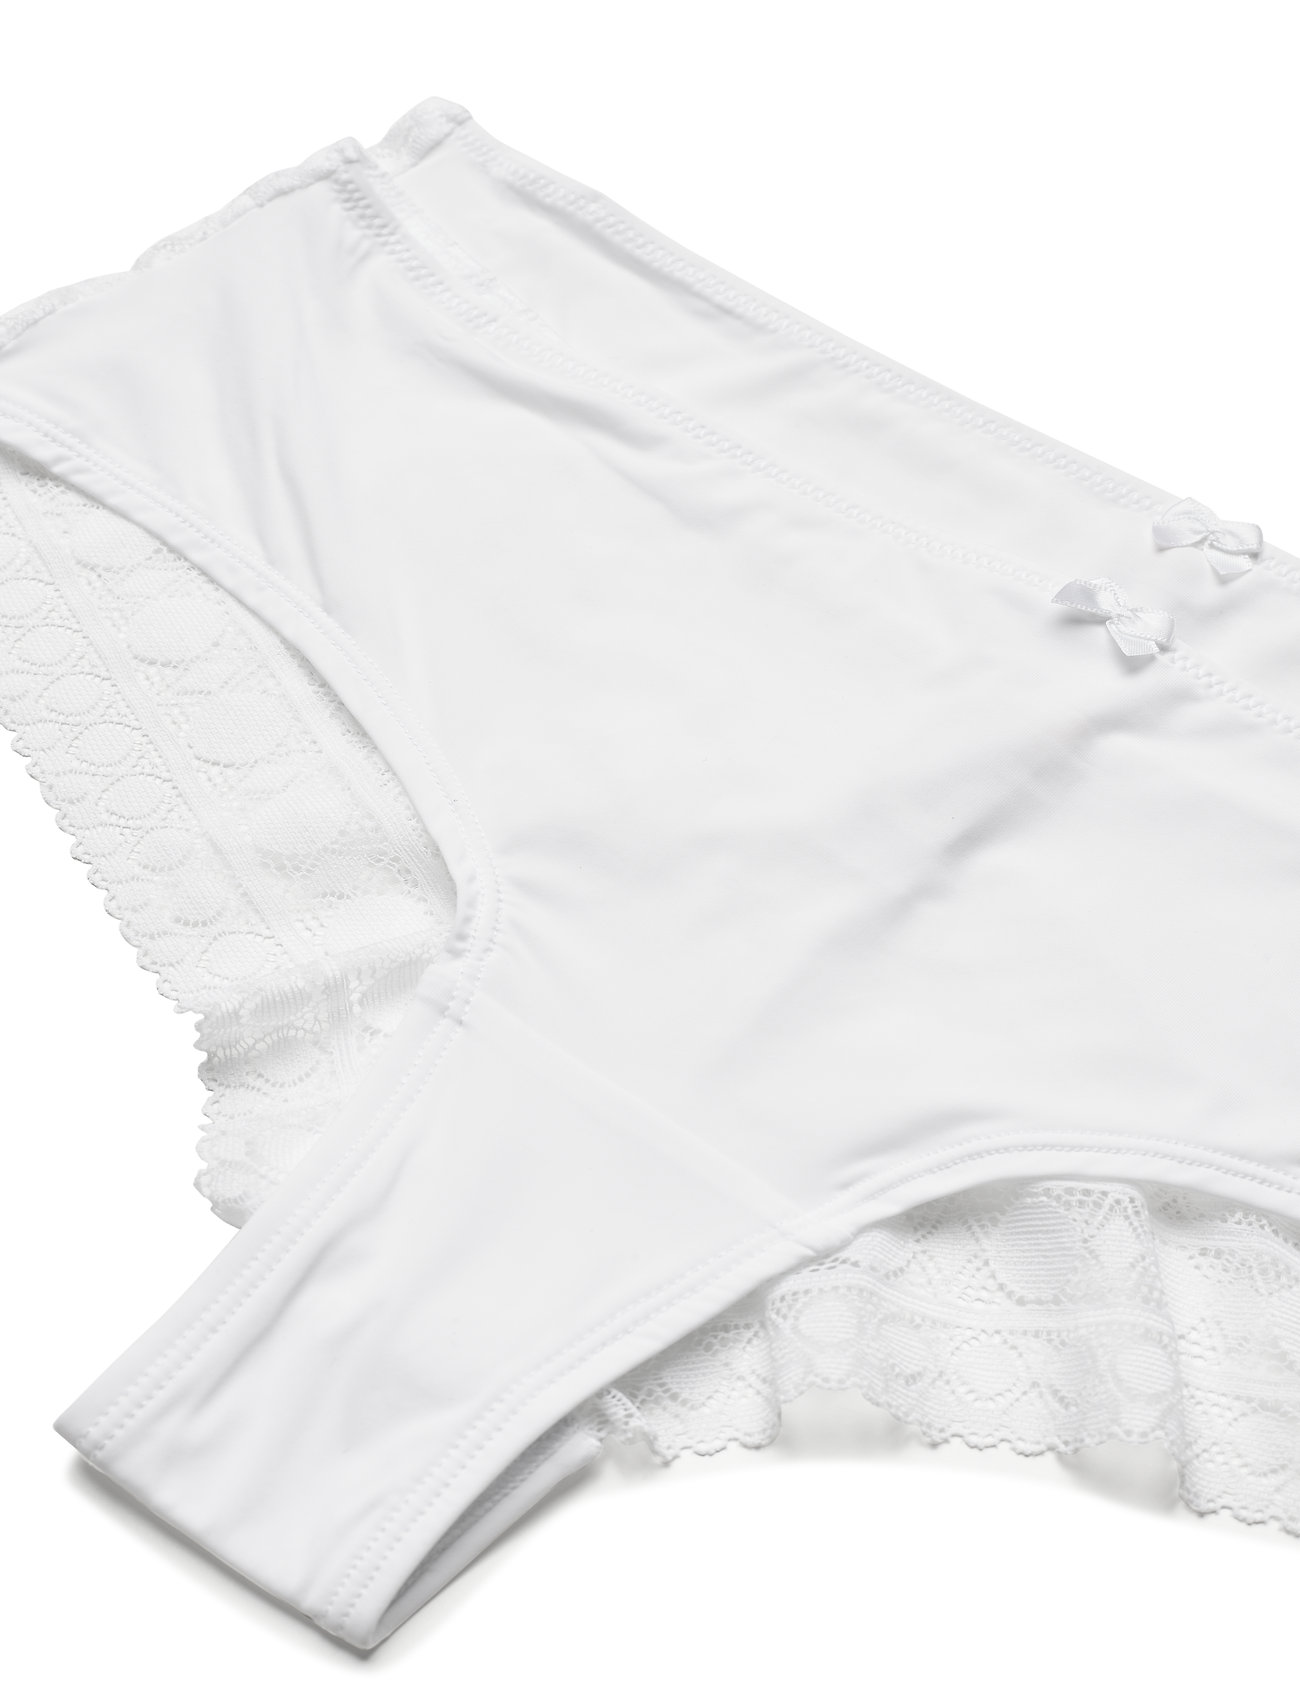 Esprit Bodywear Women - Double pack: Brazilian hipster shorts trimmed with lace - laveste priser - white - 1